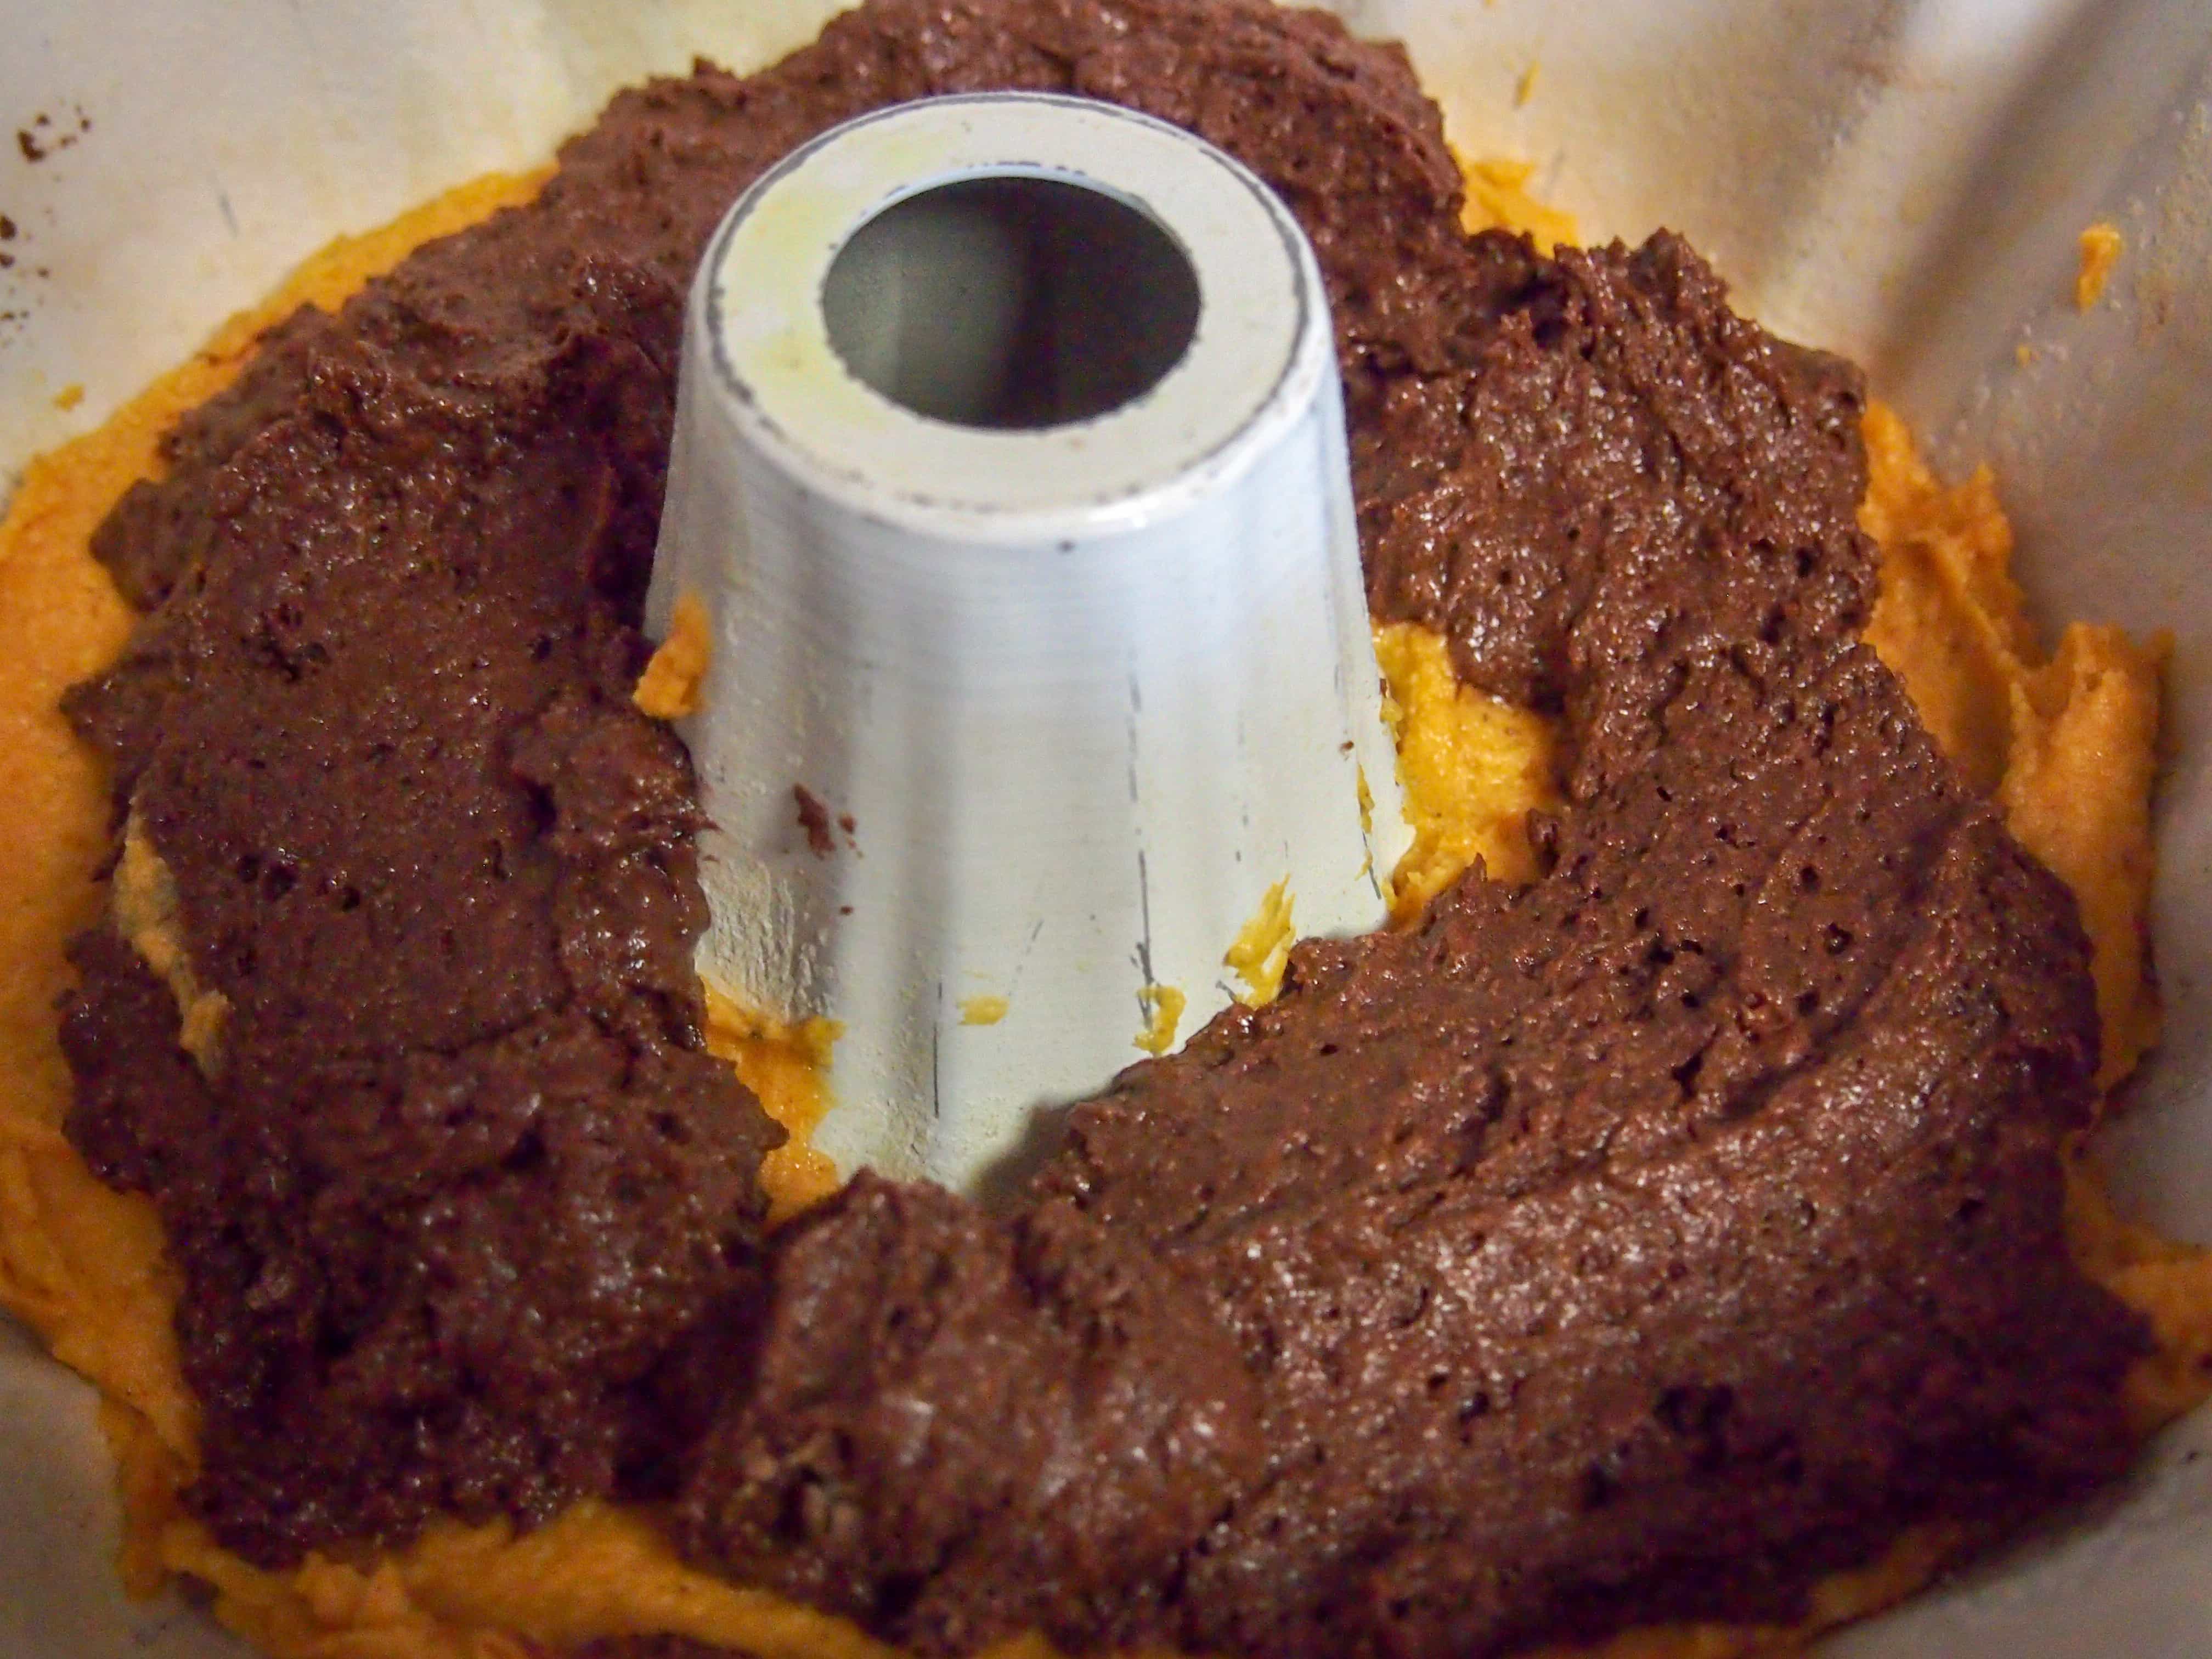 Mixing the Chocolate and Pumpkin batter for Pumpkin Chocolate Cake